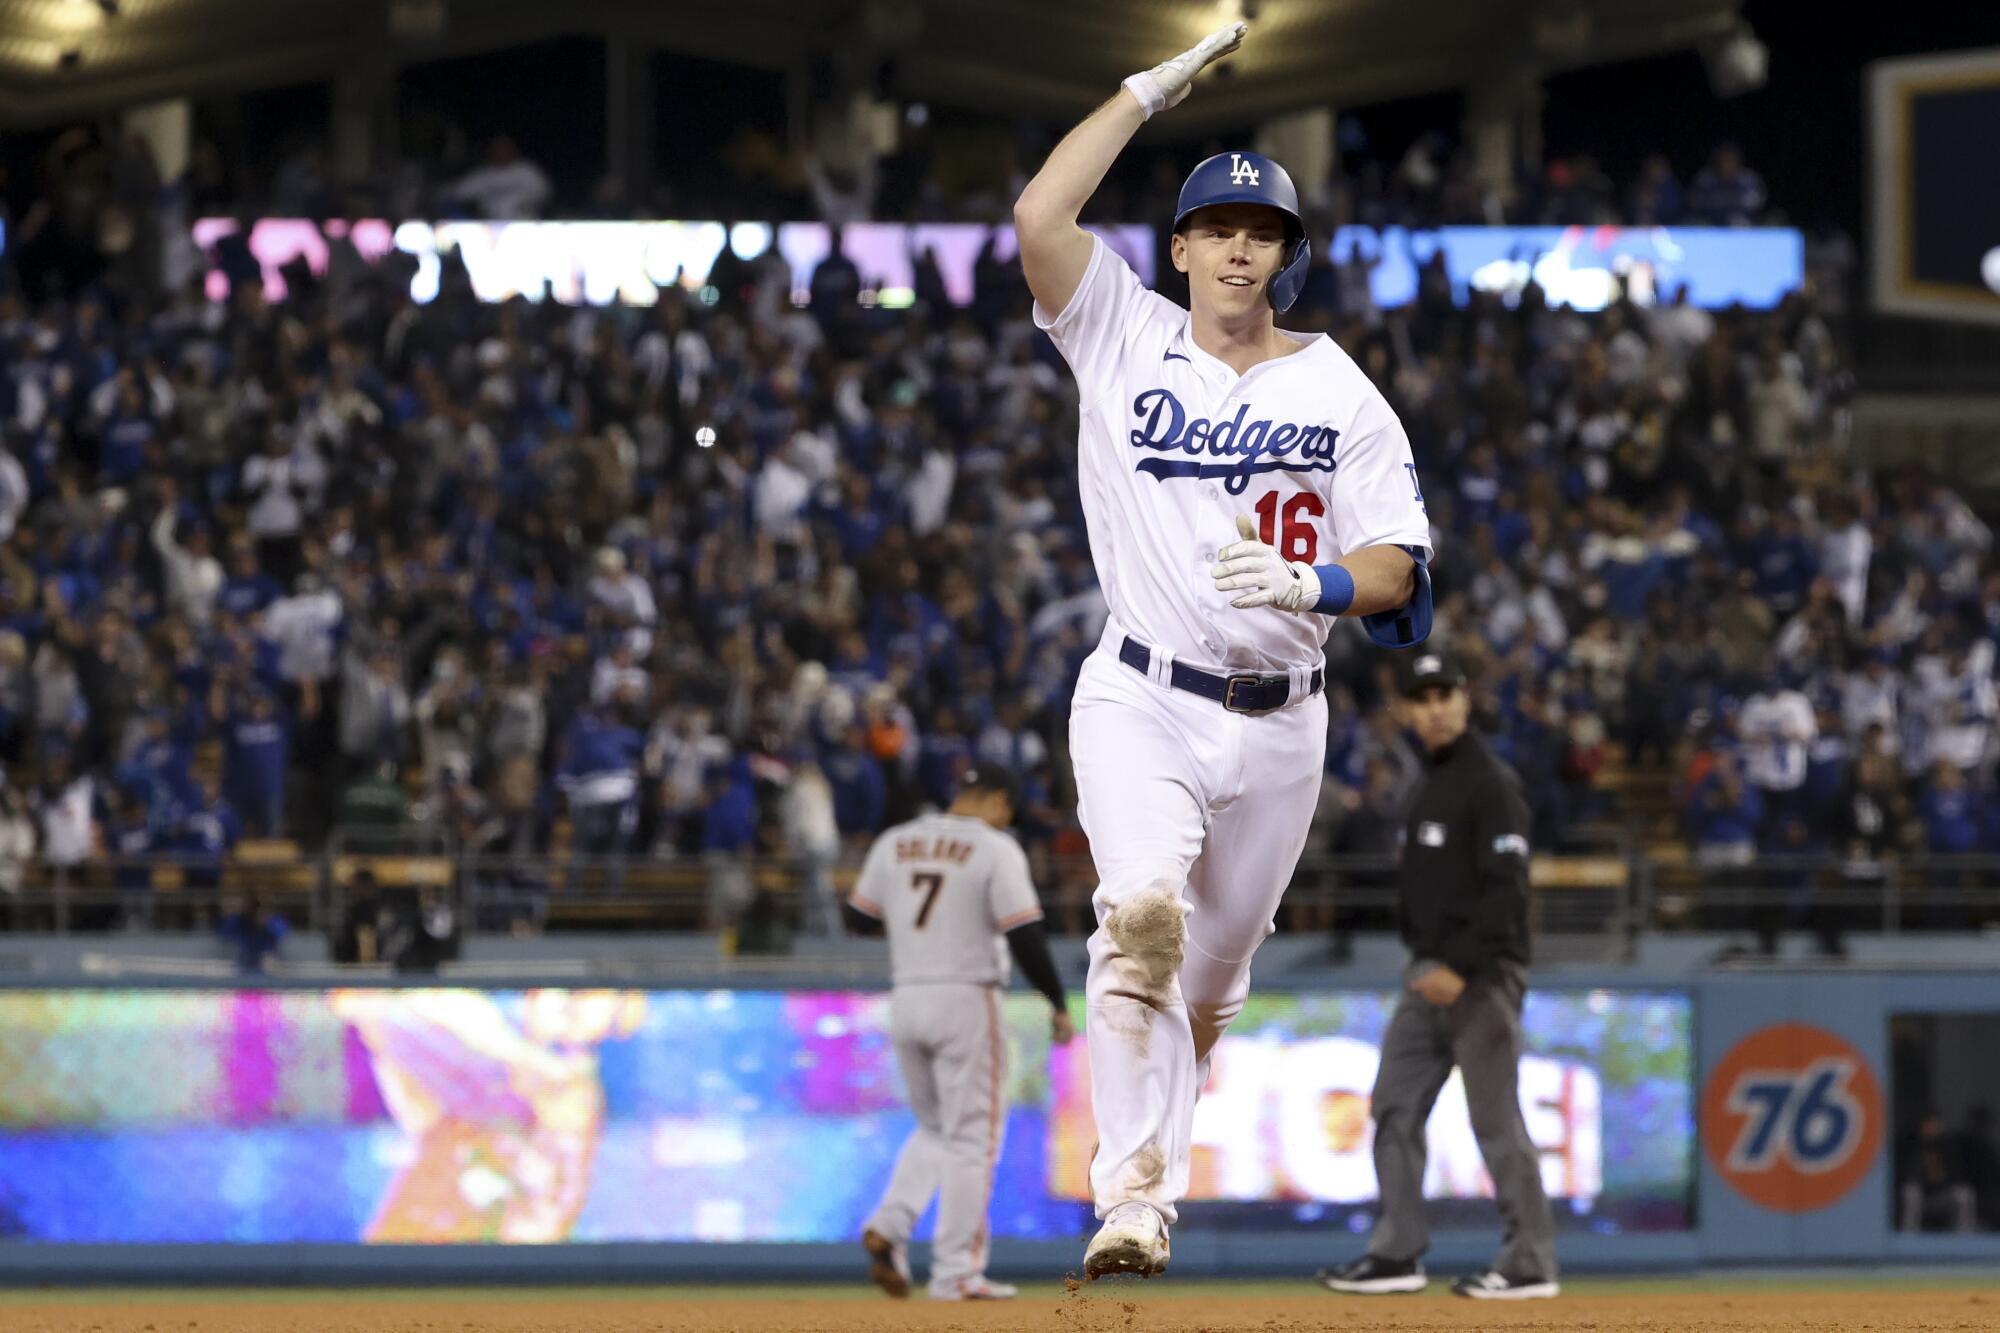 Los Angeles Dodgers on X: The Boys in Blue will be wearing their Los  Dodgers jerseys for Sunday Night Baseball in San Francisco. If you're  heading to Oracle Park, be sure to